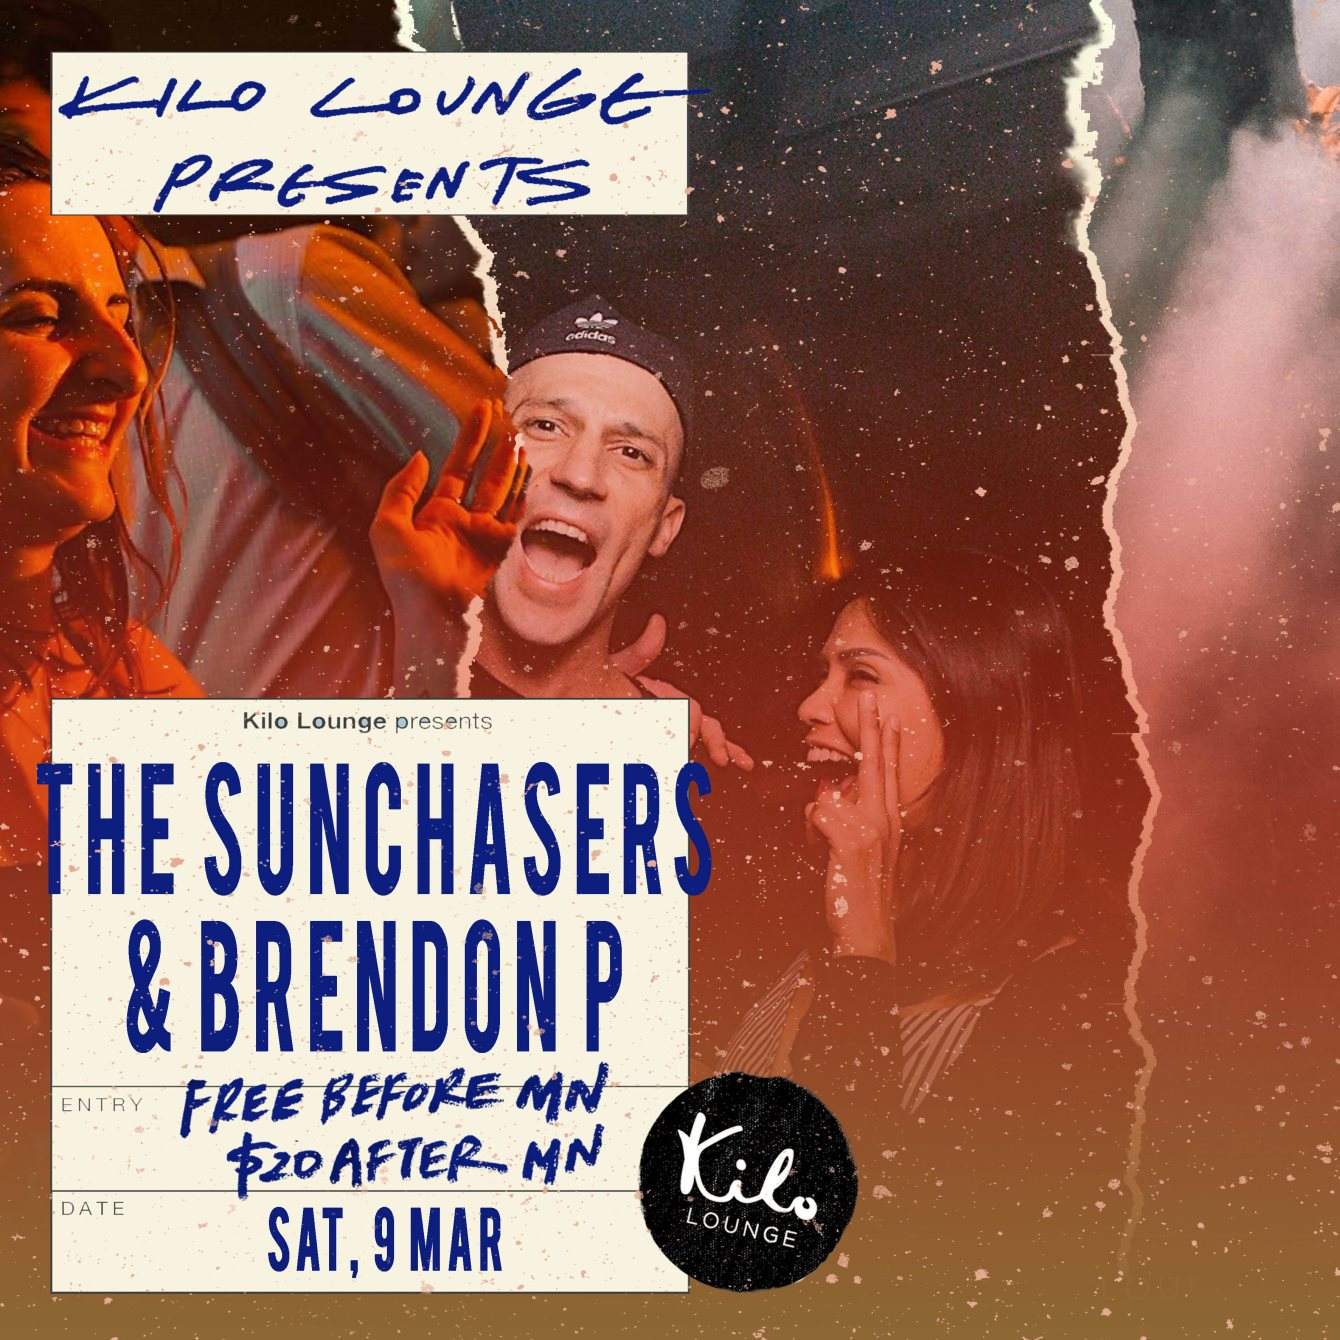 Kilo Lounge presents Brendon P & The Sunchasers - Página frontal